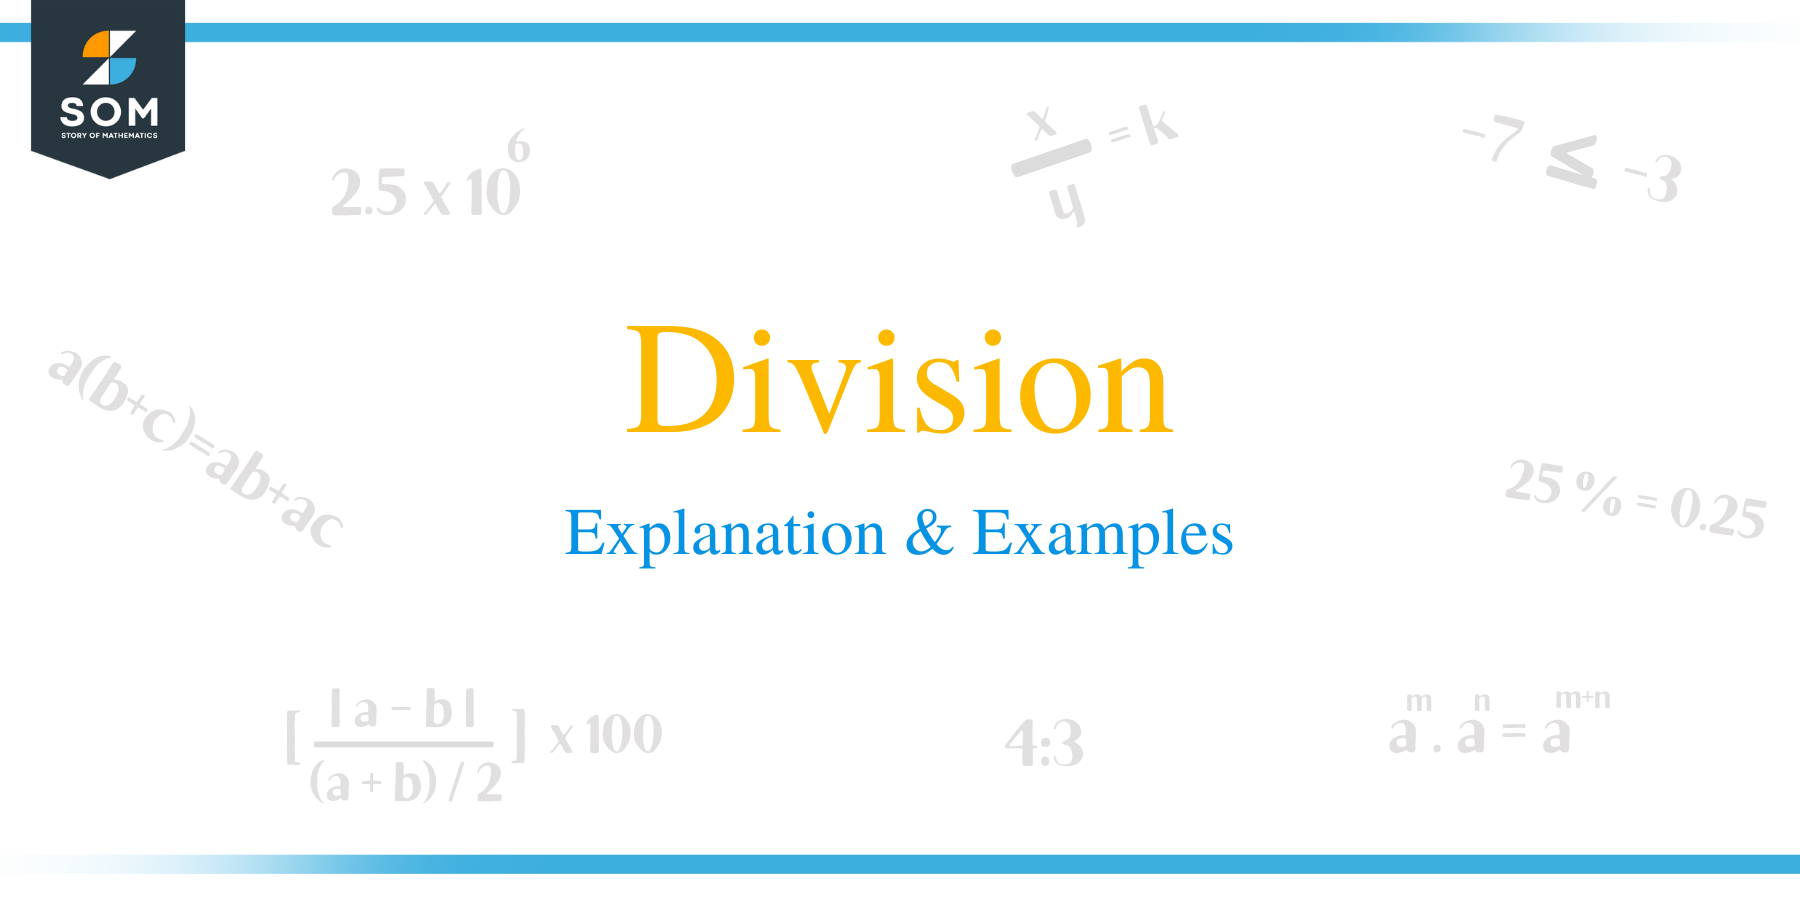 What is Division